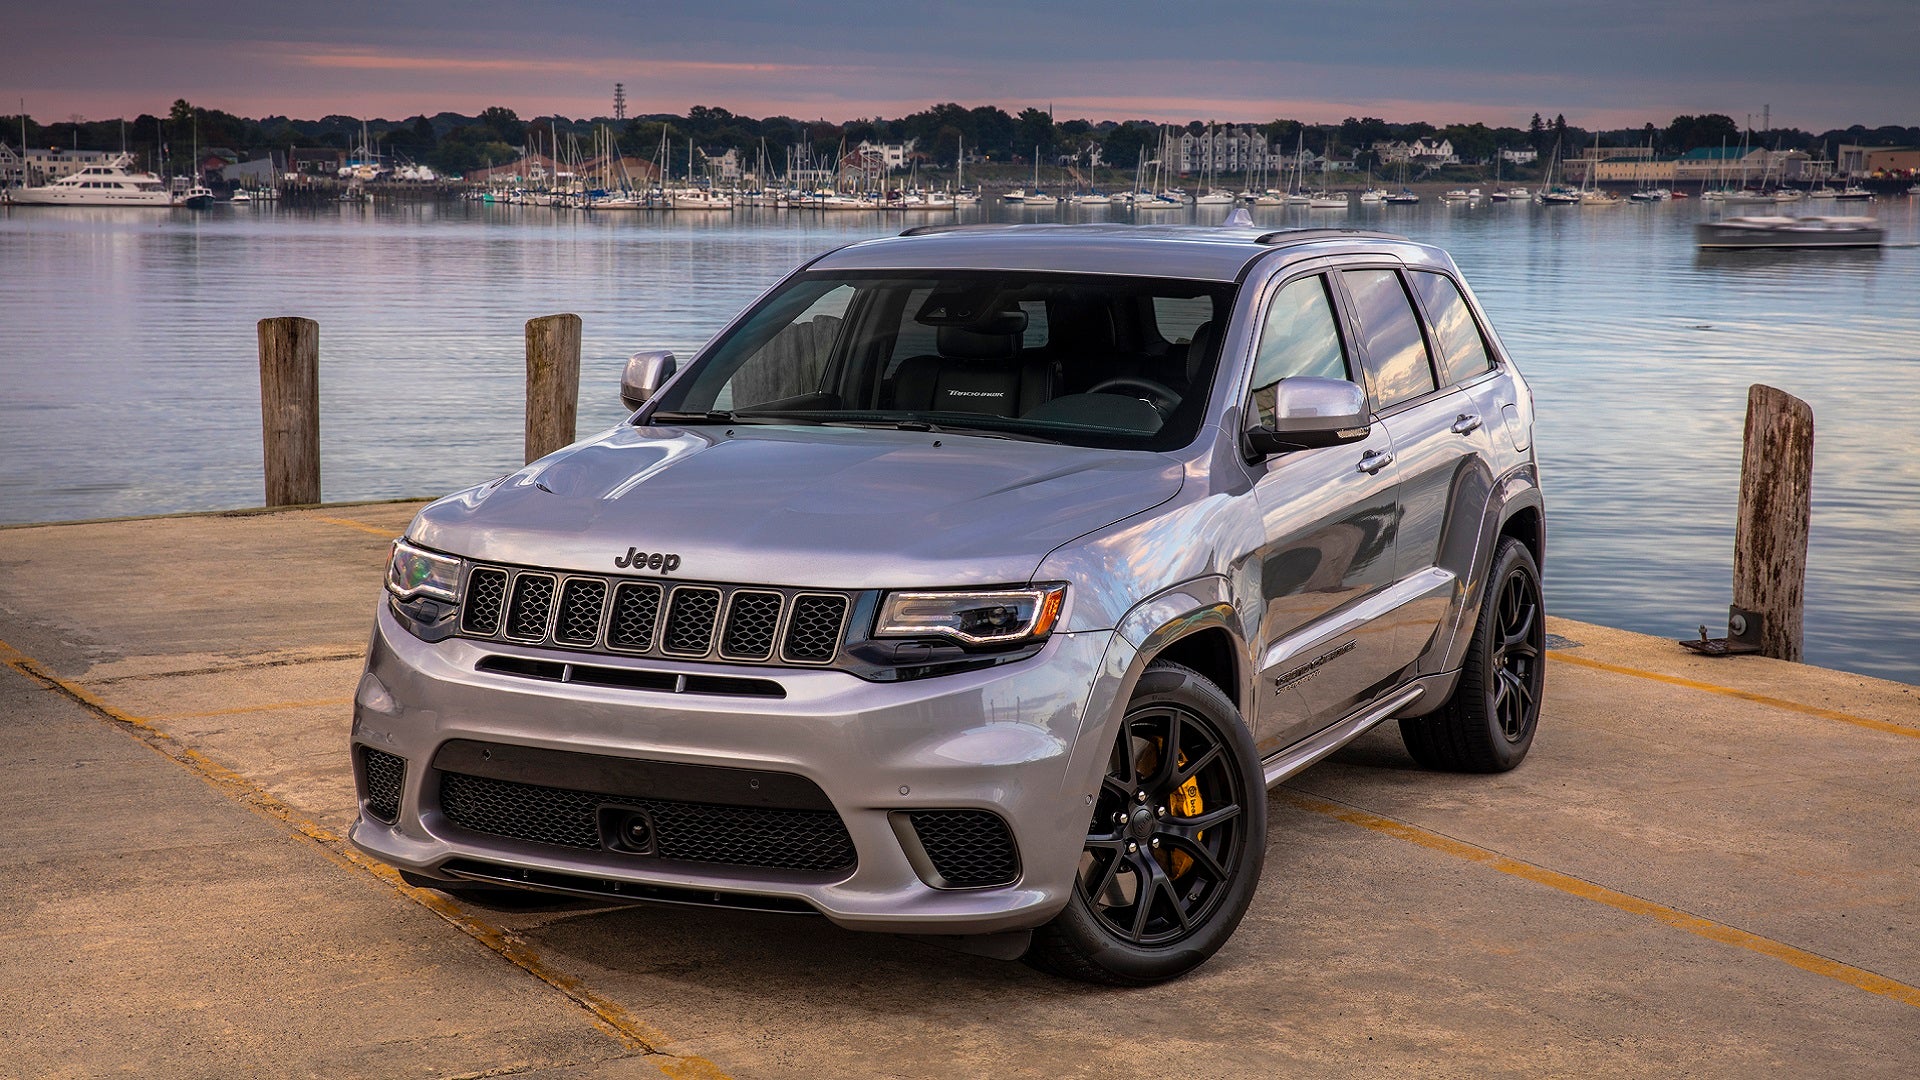 Could There Be a Jeep Grand Cherokee Trackhawk 'Redeye' in the Works?